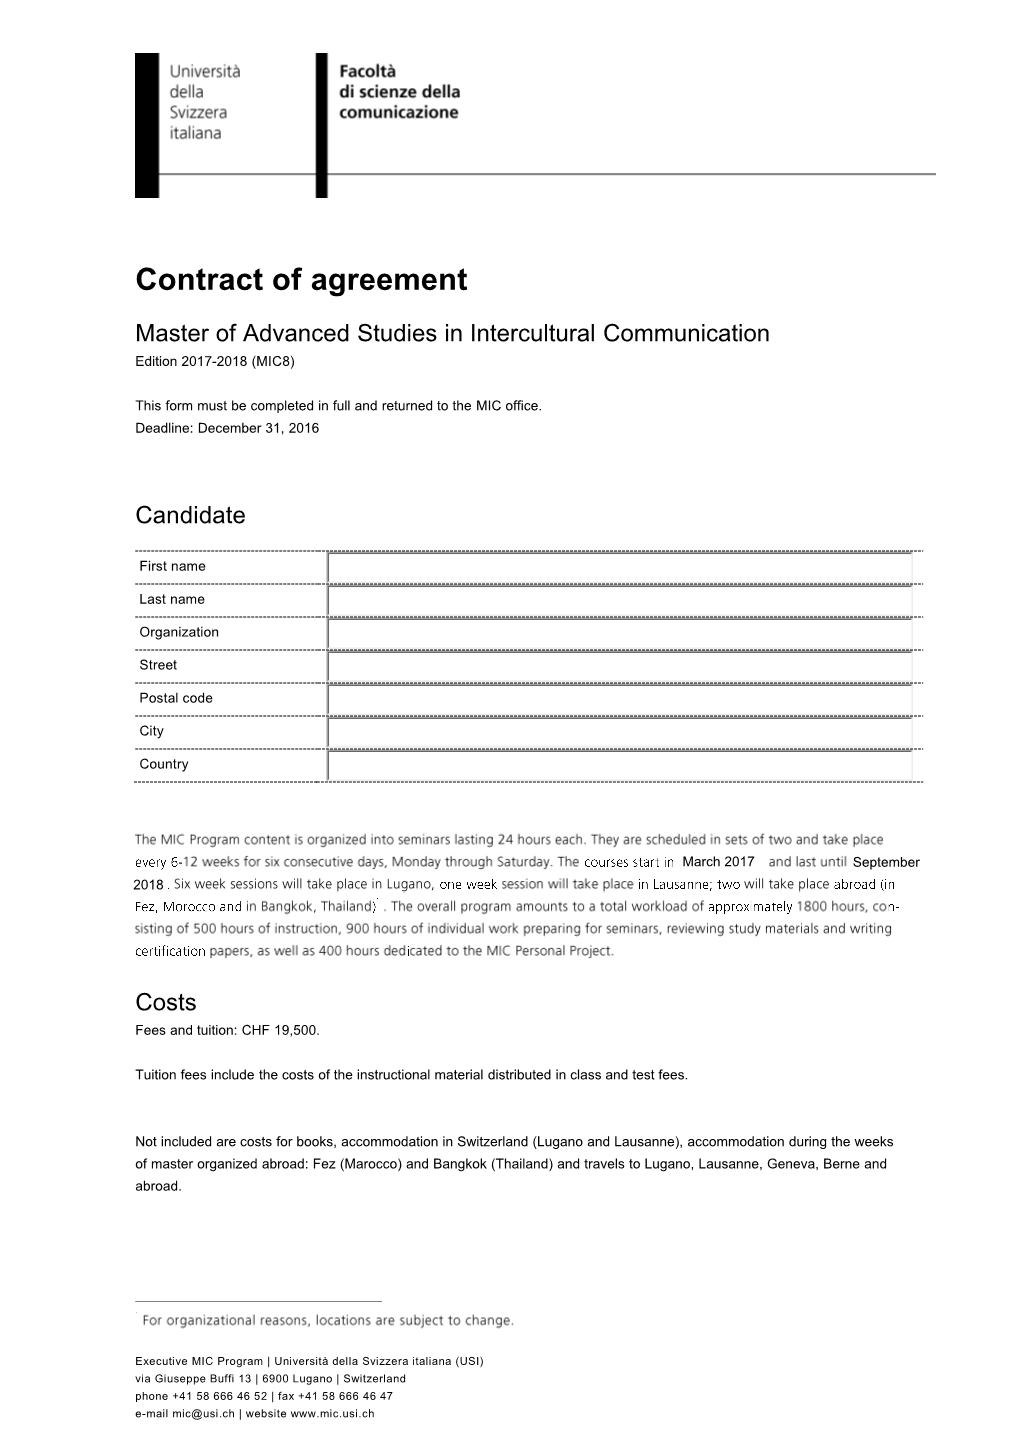 Contract of Agreement